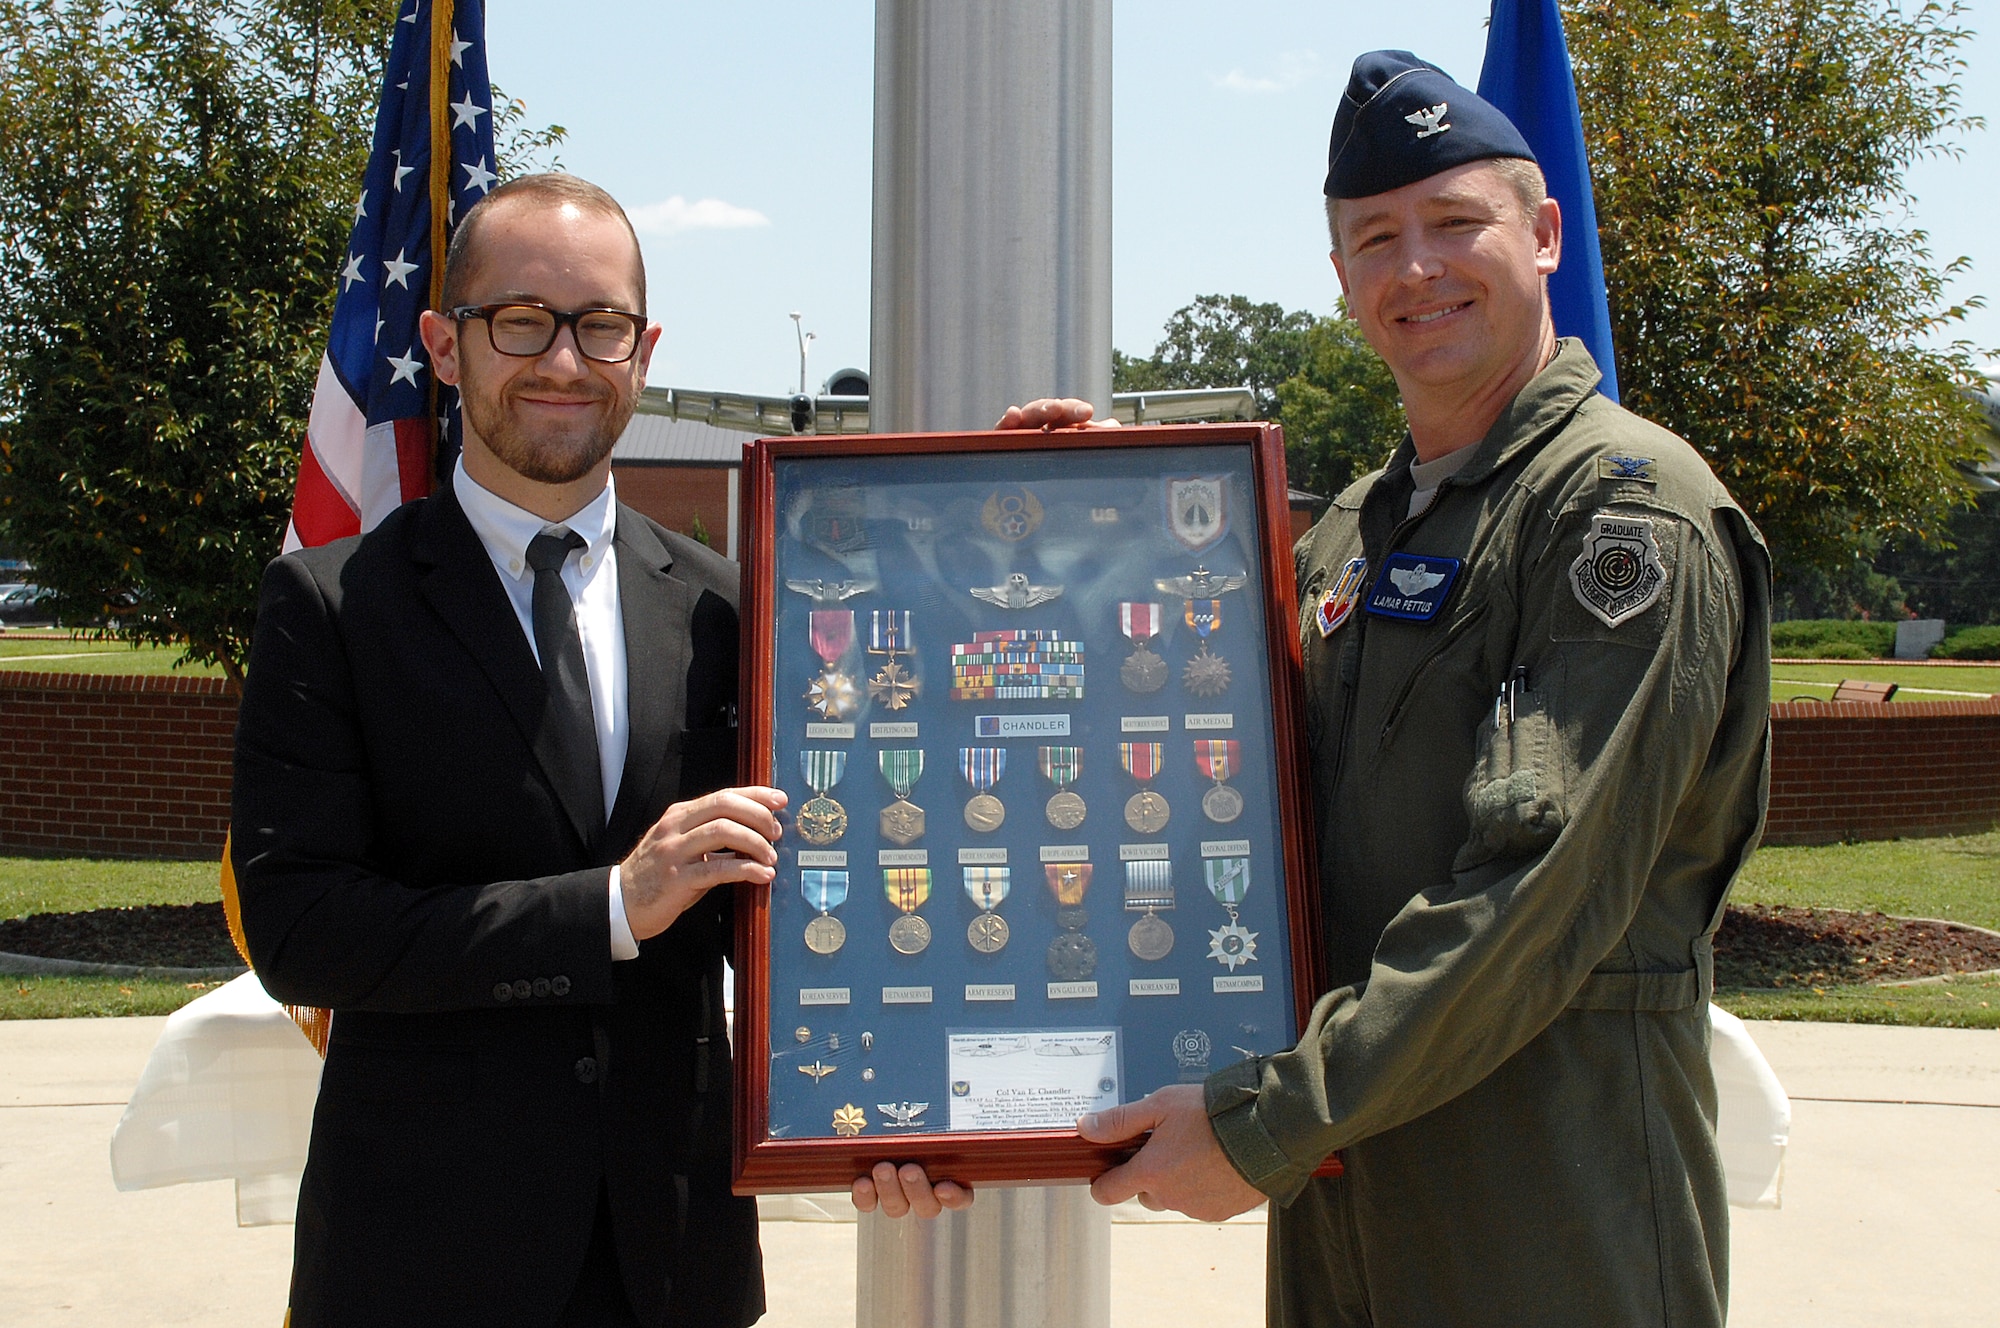 Thomas Nash, grandson of retired Col. Van Chandler, presents Col. Lamar Pettus, 4th Fighter Wing vice commander, with a shadow box of his grandfather’s medals during a ceremony at Seymour Johnson Air Force Base, N.C., Aug. 5, 2013.  Among Chandler’s honors are the Legion of Merit medal with one oak leaf cluster and the Distinguished Flying Cross with two oak leaf clusters.  (U.S. Air Force photo by Airman 1st Class Brittain Crolley/Released)